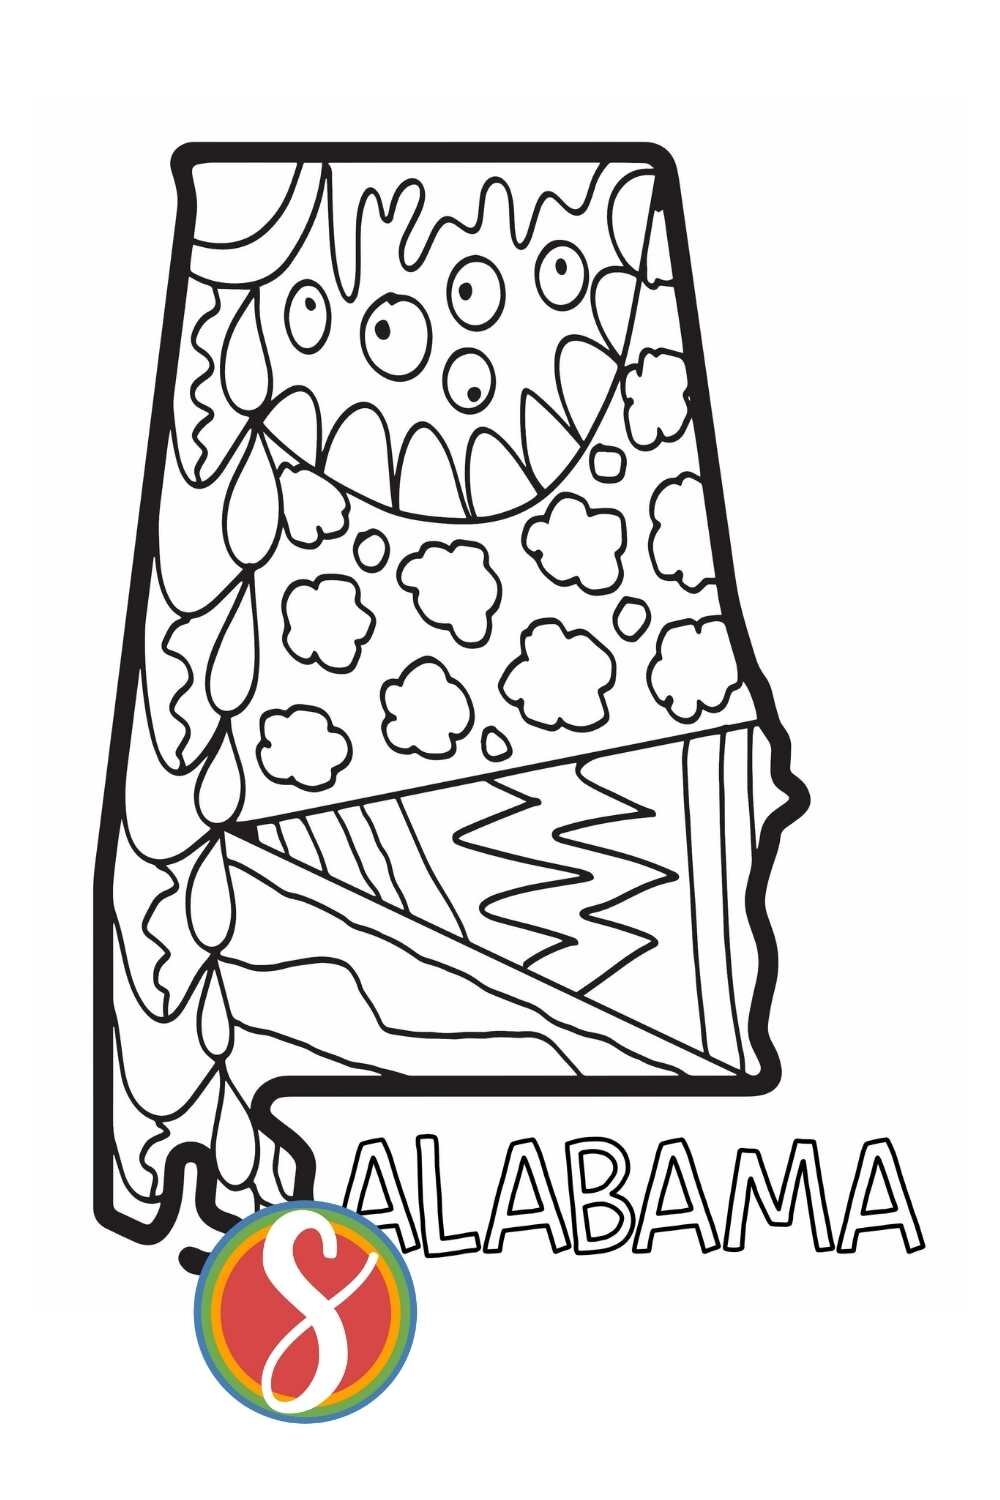 Alabama coloring page, outline of the state with doodles inside